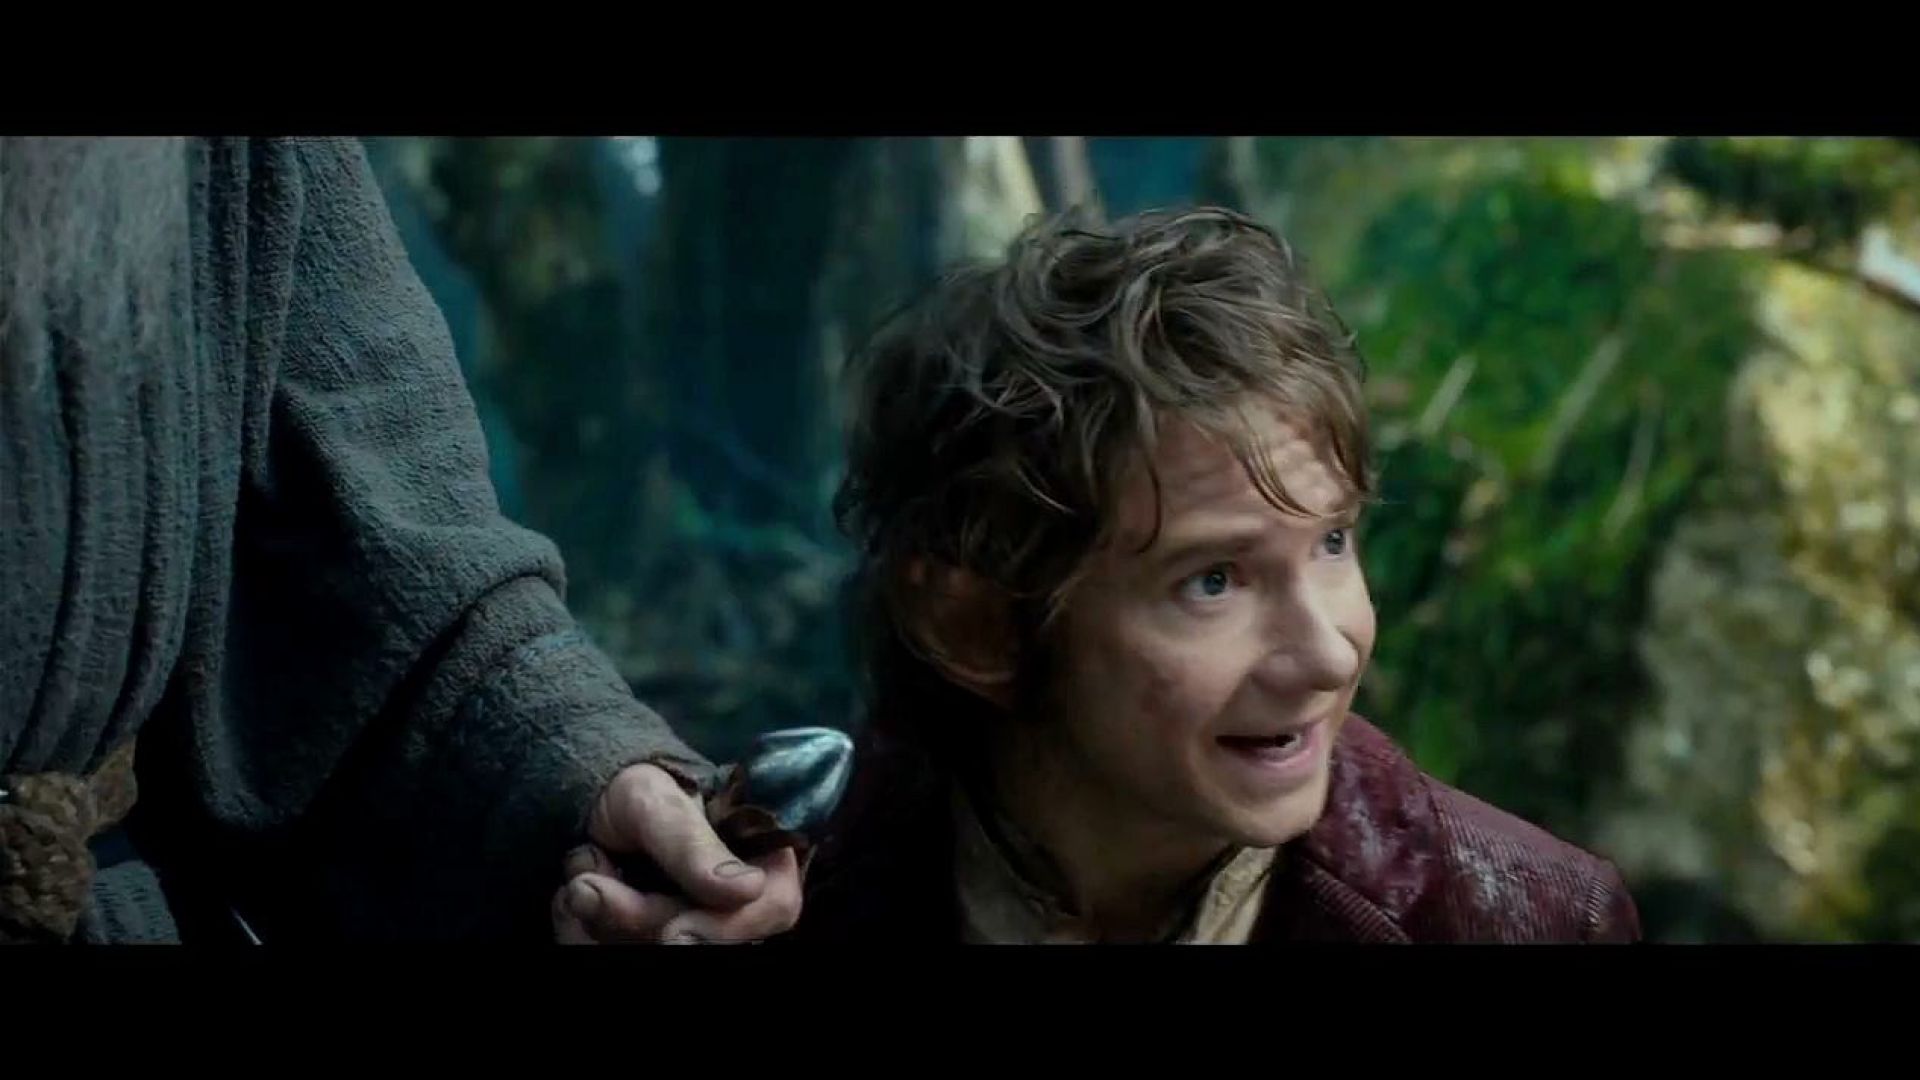 Warg-Scouts hunt down Bilbo and the dwarfs in The Hobbit: An Unexpected Journey